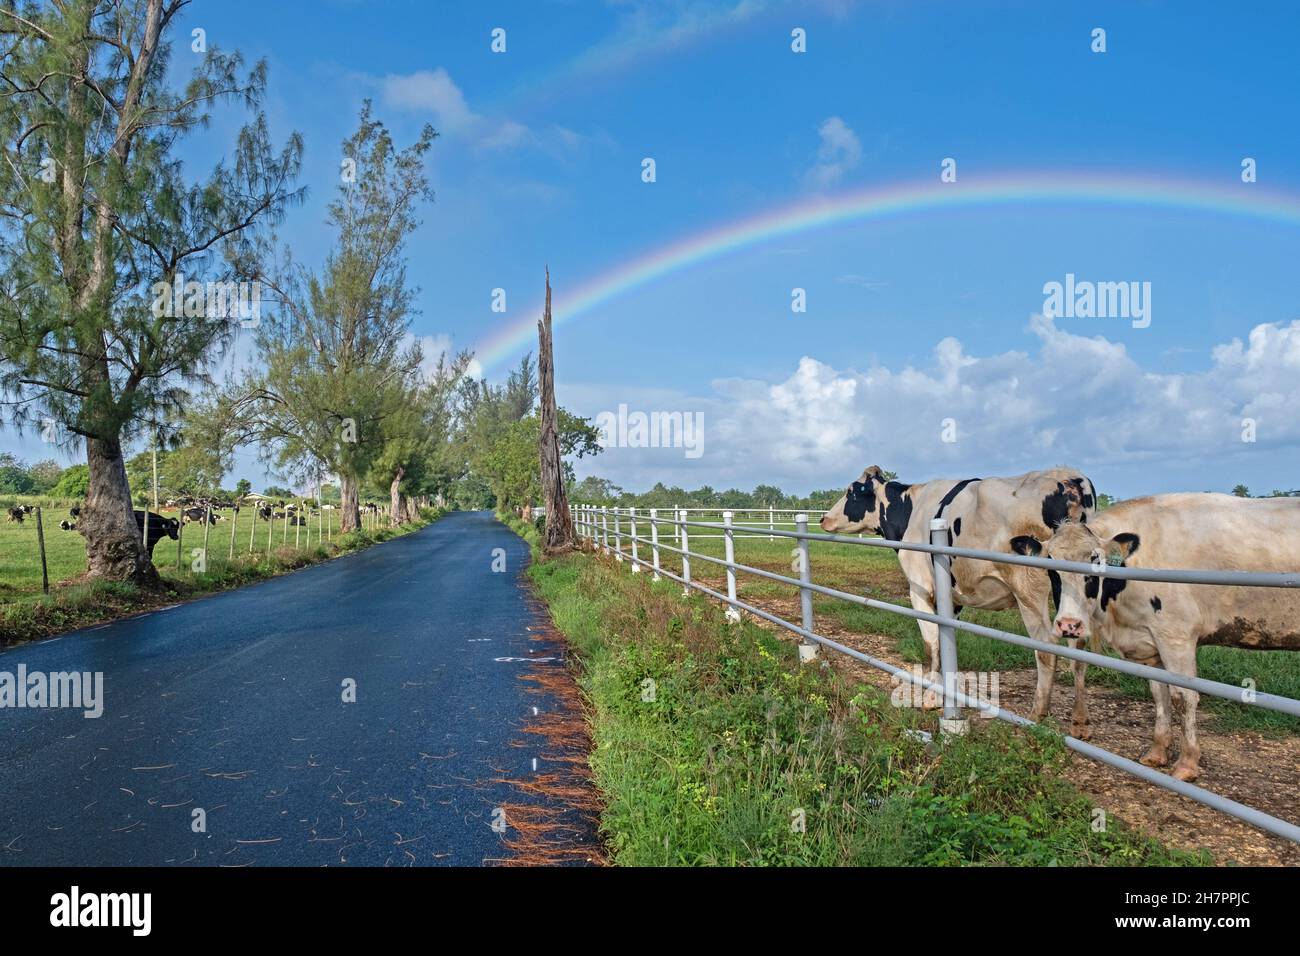 Rainbow and dairy cows in field along country road in the central part of Puerto Rico, Greater Antilles, Caribbean Stock Photo